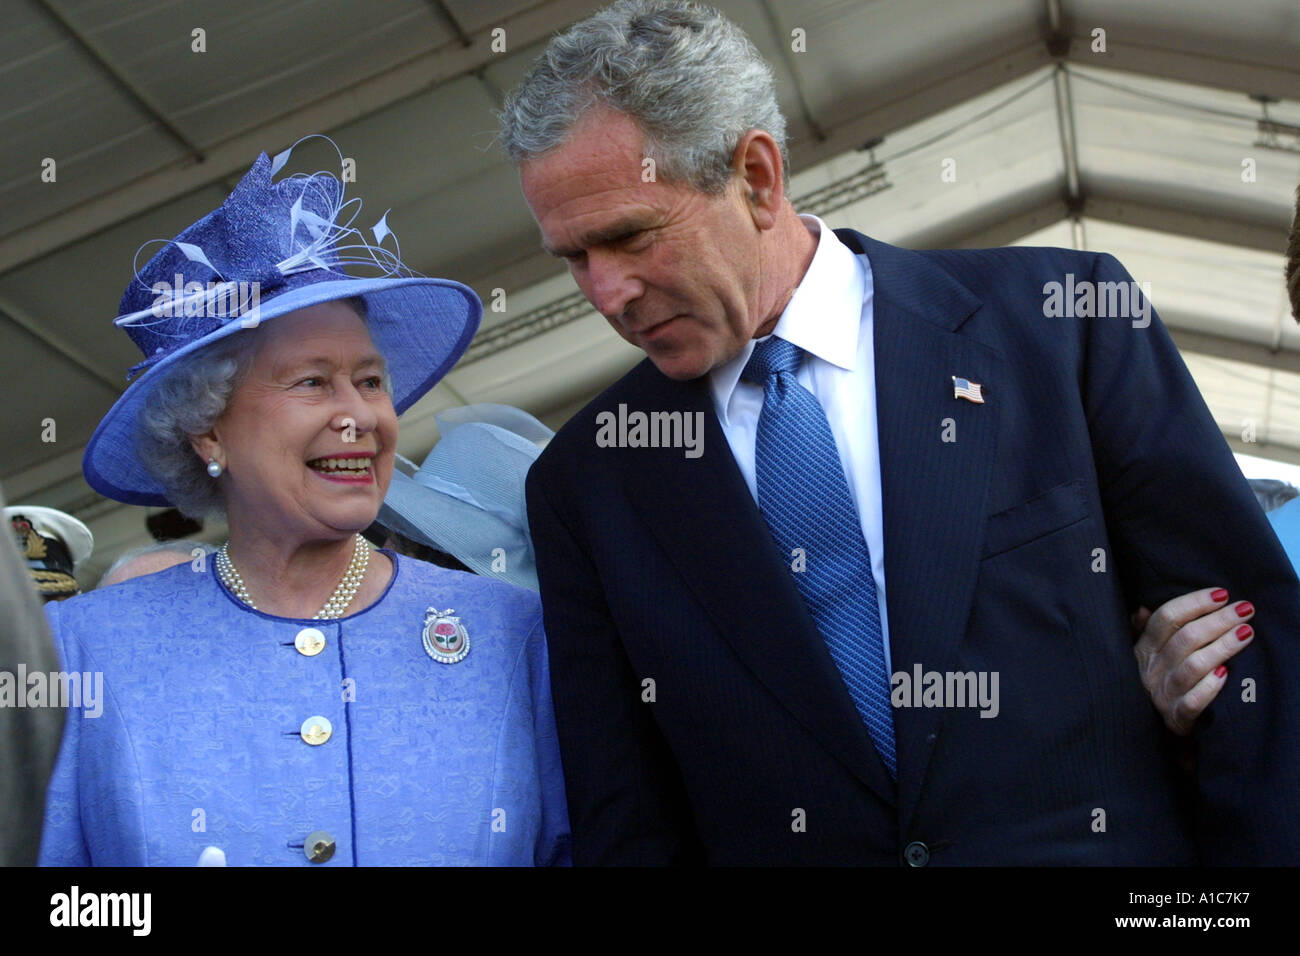 Queen Elizabeth II George Bush 60th anniversary of Invation to Normandy 06 06 2004 Stock Photo